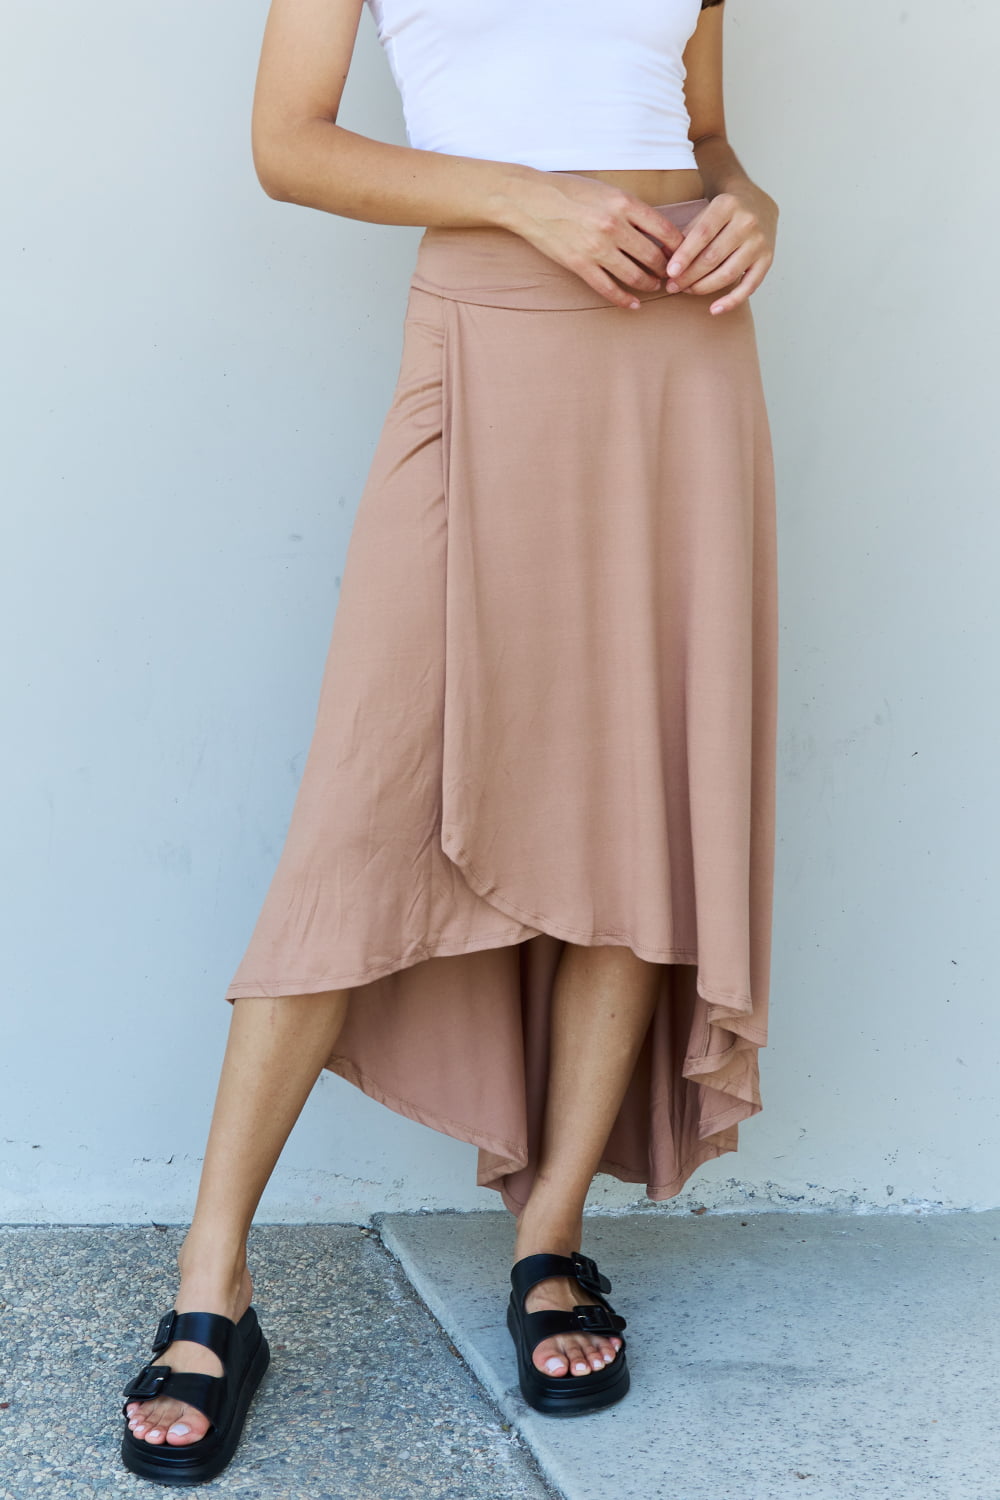 Ninexis First Choice High Waisted Flare Maxi Skirt in Camel - Babbazon evening gowns